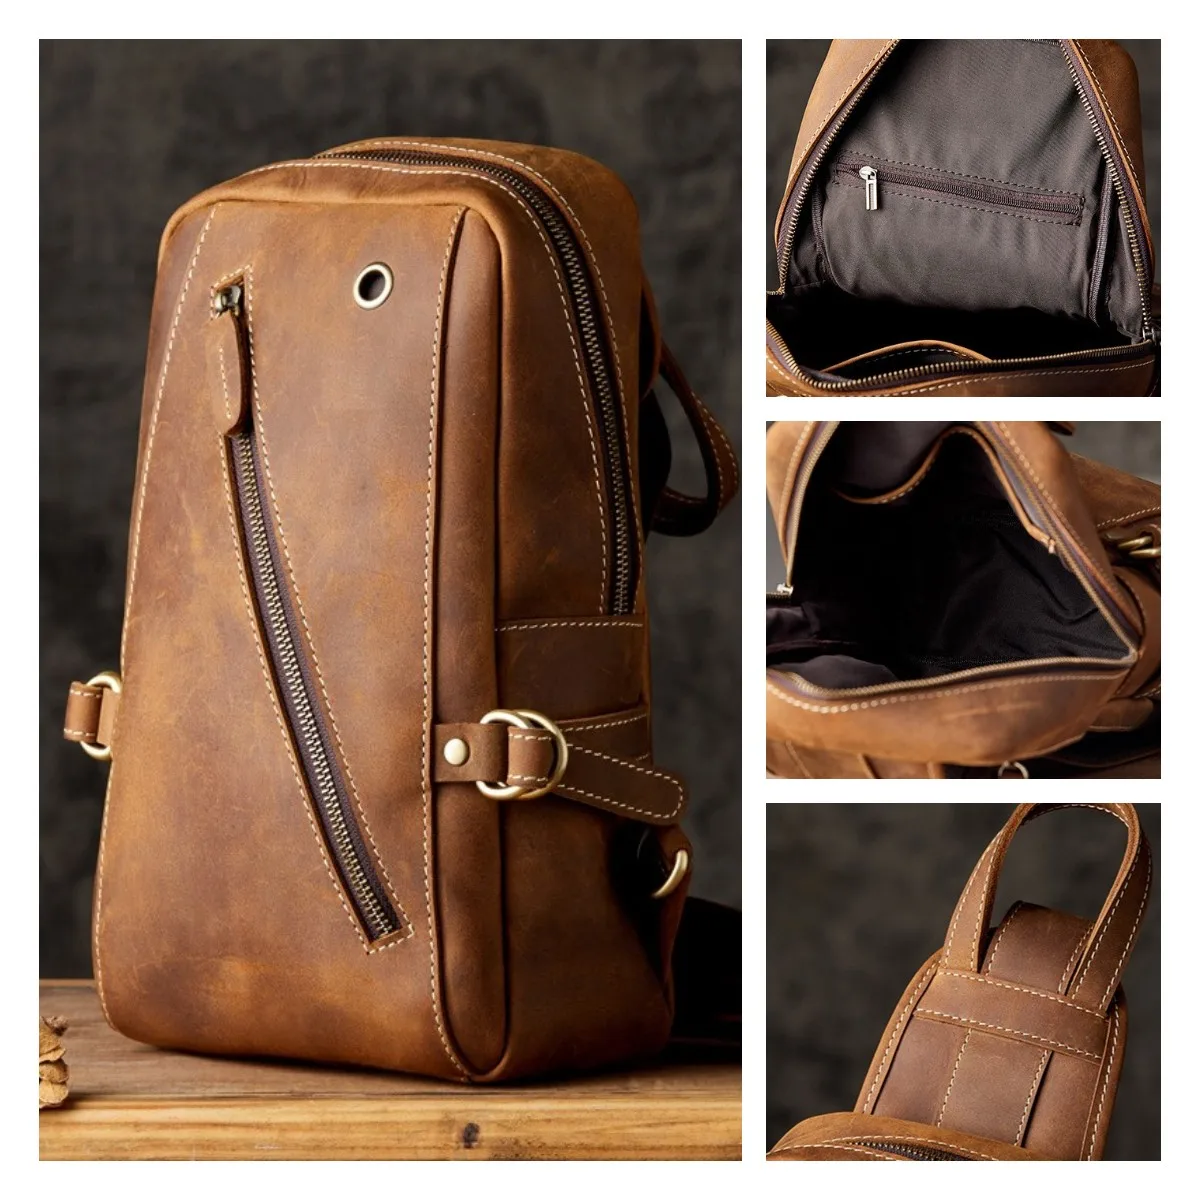 Men's Genuine Leather Chest Bag Large Capacity Shoulder Bag Top Layer Cowhide Sling Crossbody Travel Pack for Male Women Female